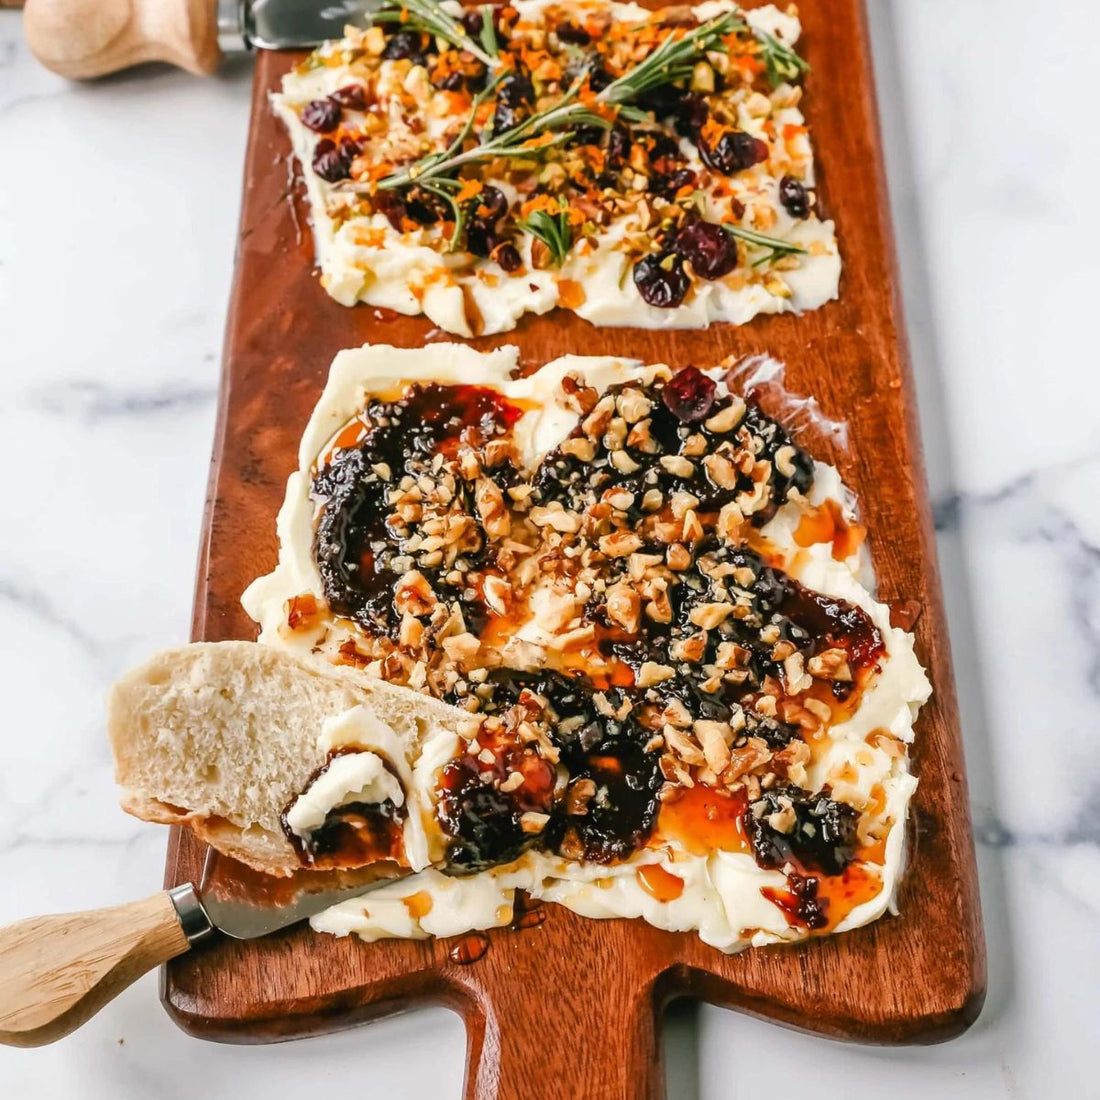 Butter Board Recipes - The New Charcuterie Board That is Taking Over Tiktok